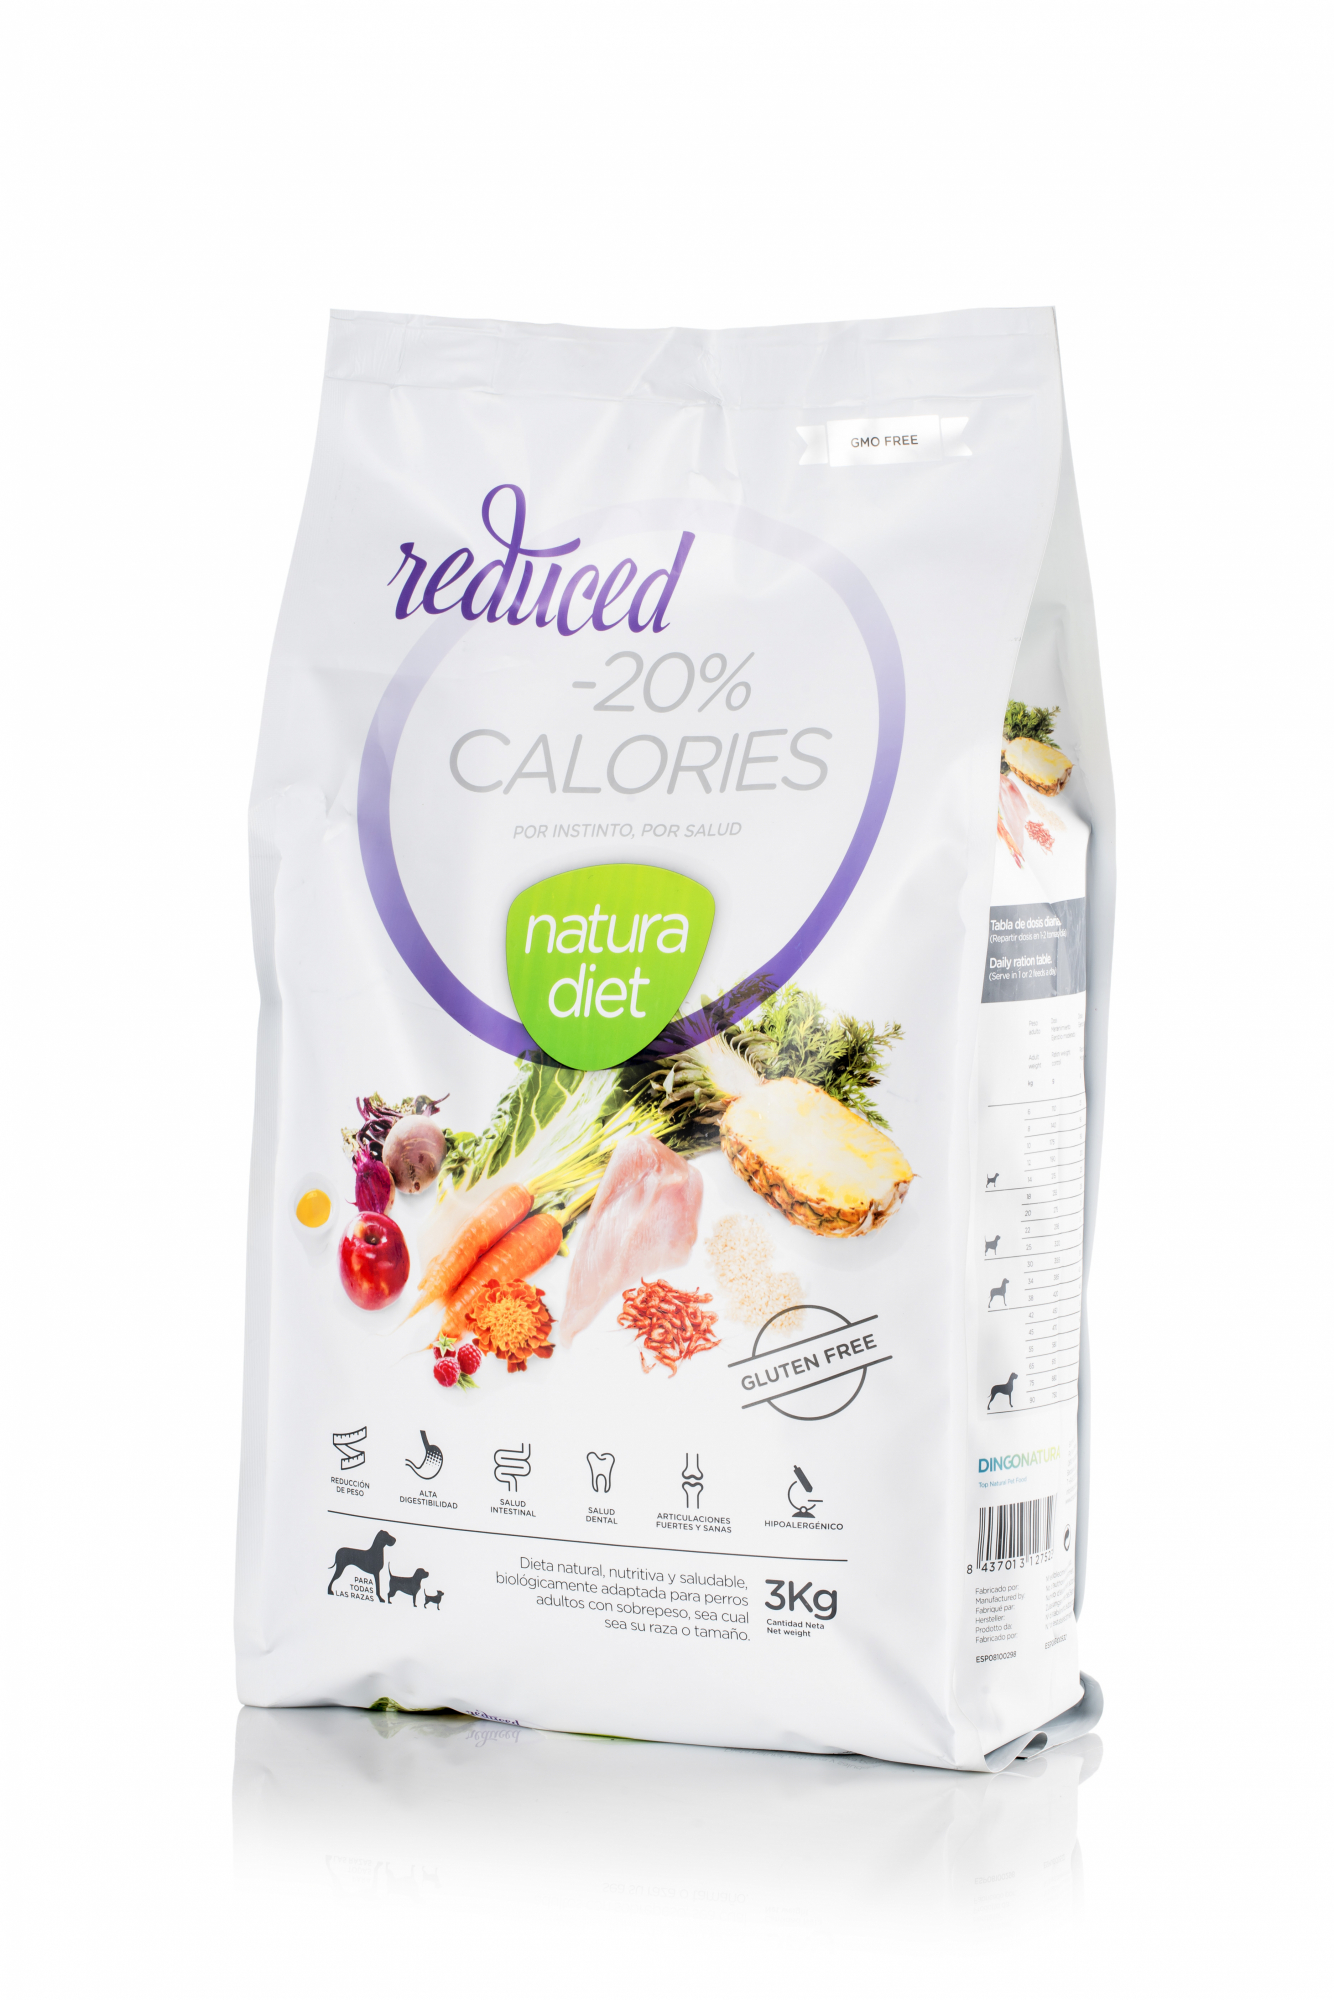 NATURA DIET Reduced -20% calorie pe Cane in sovrappeso